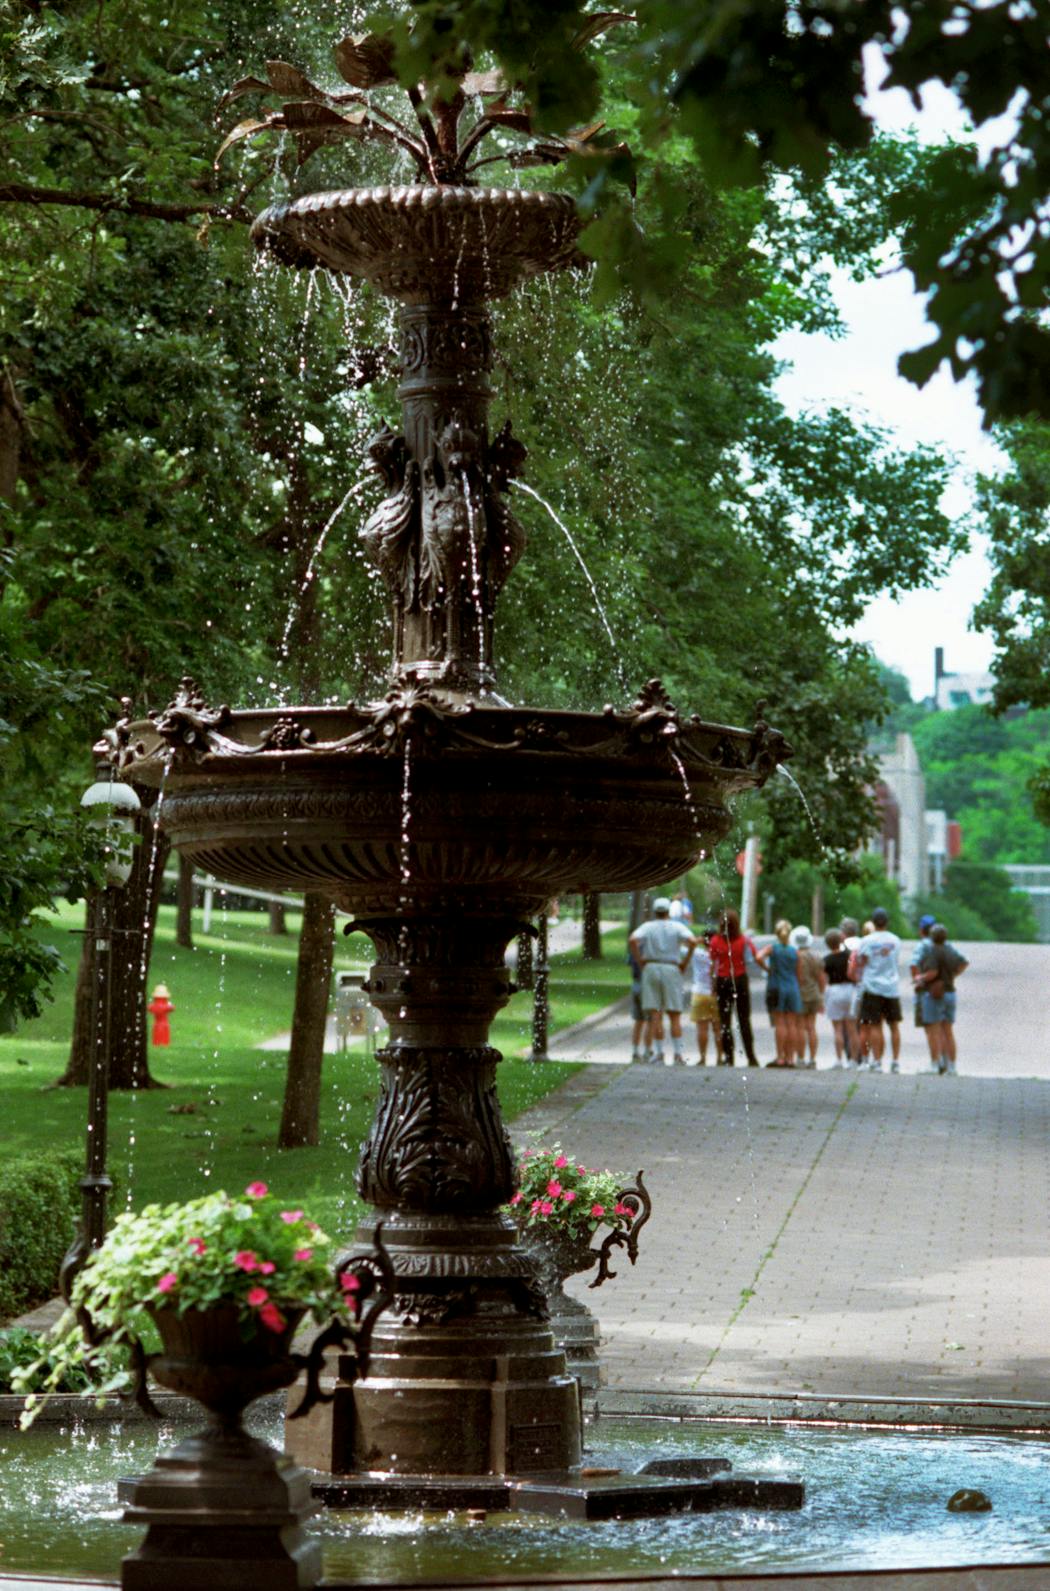 The Irvine Park fountain, a 1978 reproduction of the 1881 original, features water spouting from gargoyles rather than dog heads.